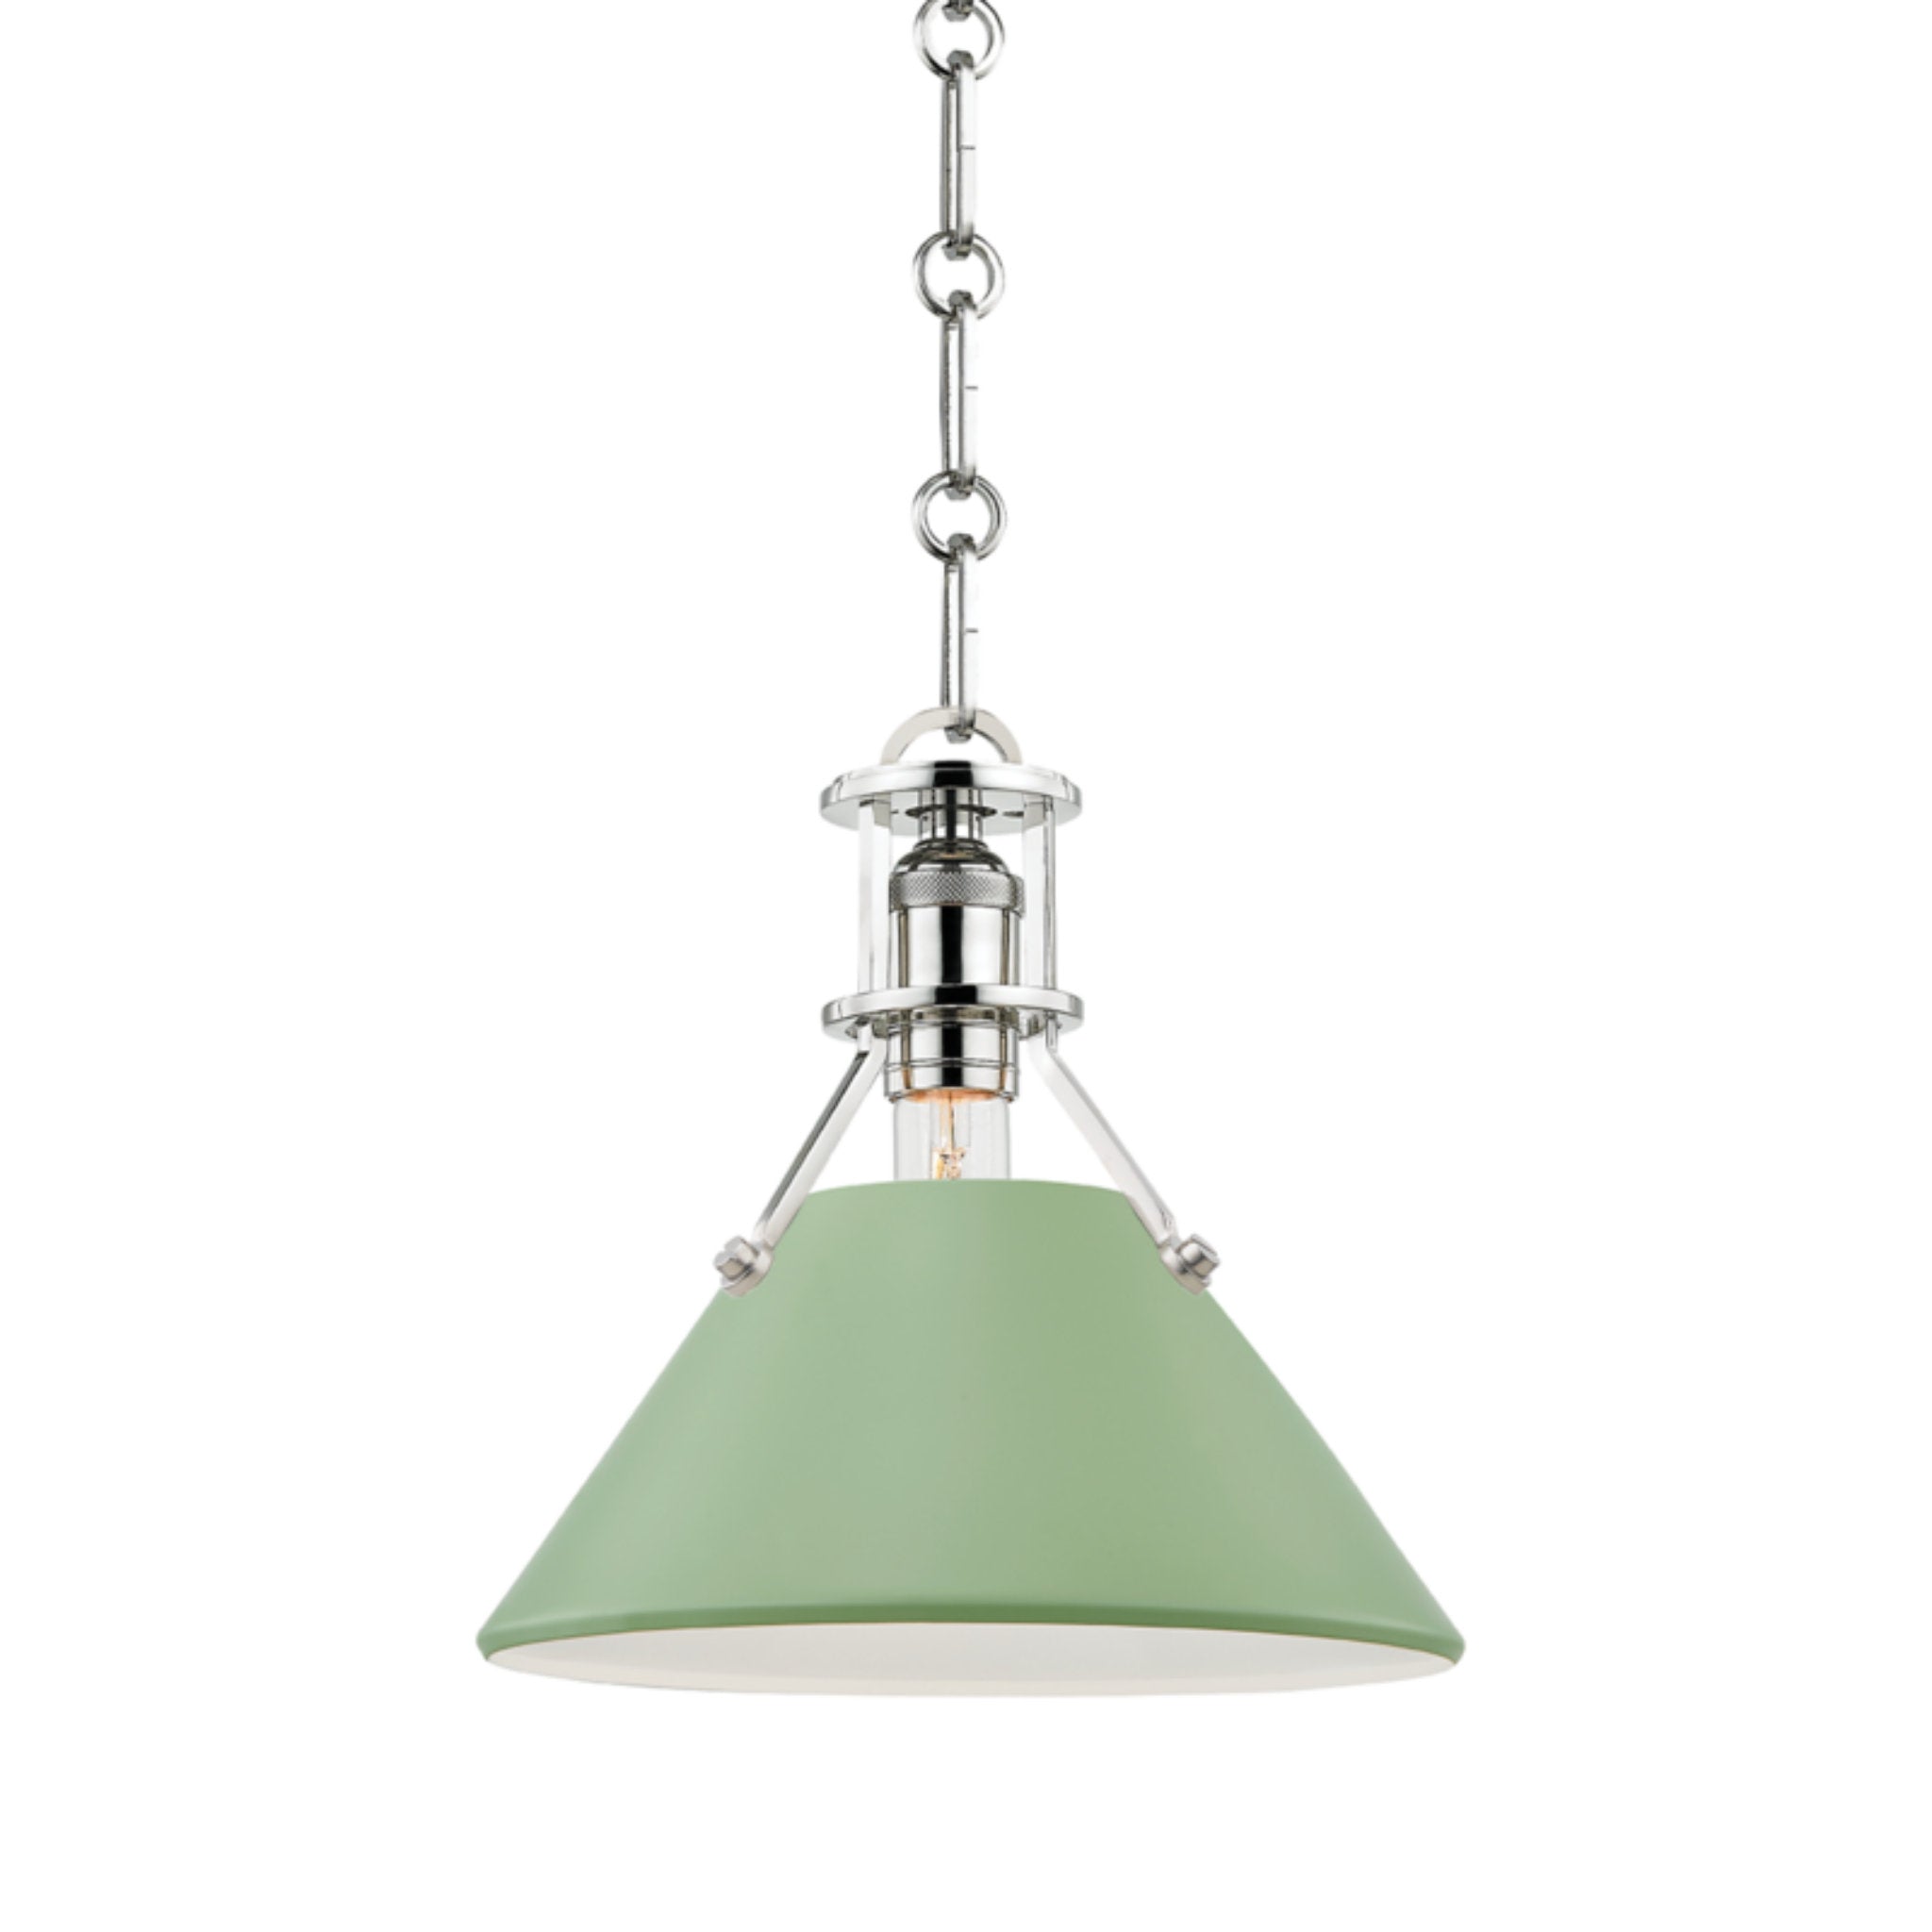 Painted No.2 1 Light Pendant in Polished Nickel/leaf Green by Mark D. Sikes